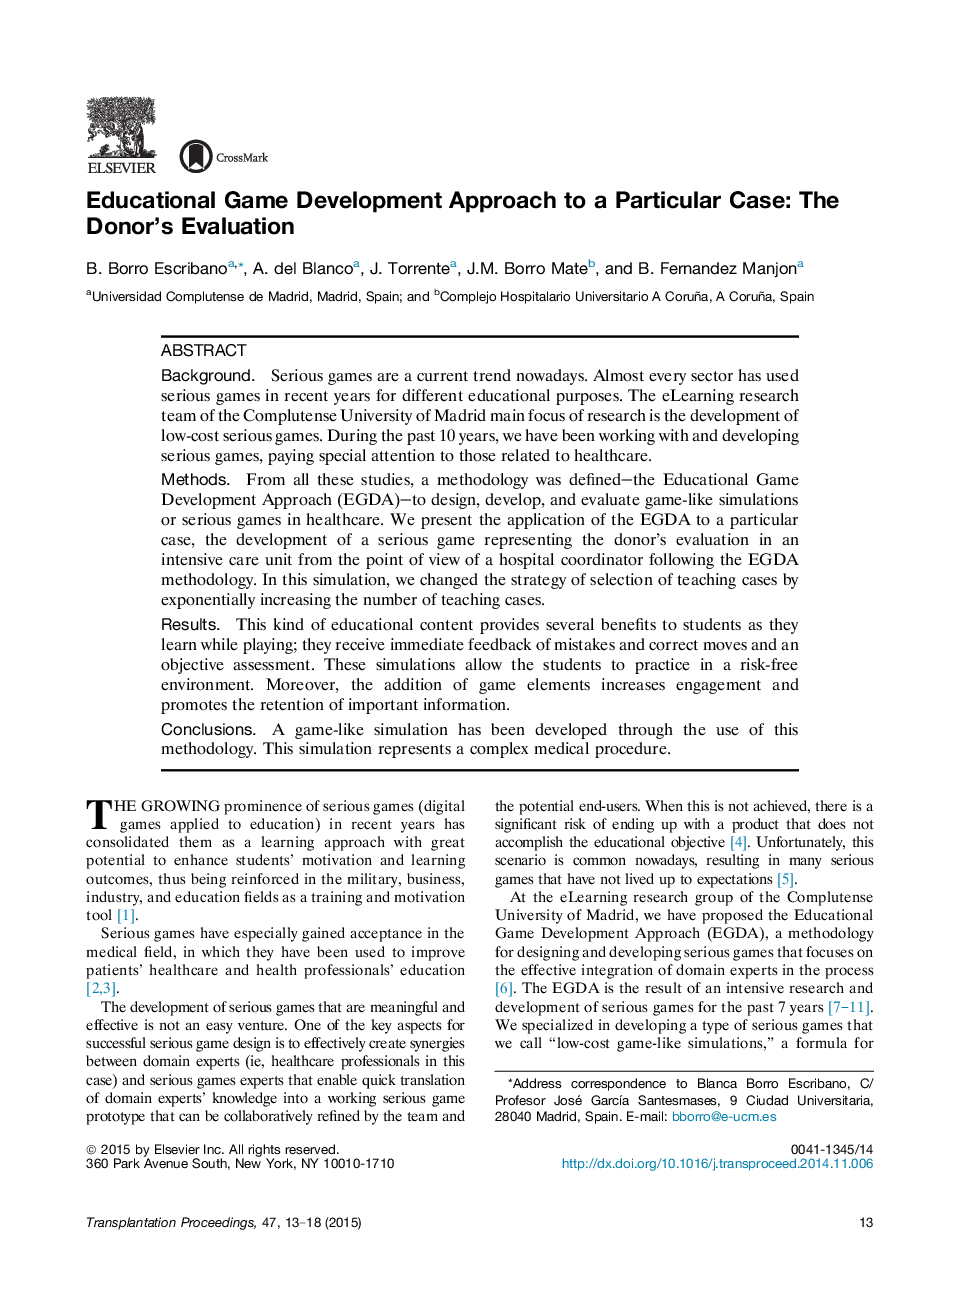 Educational Game Development Approach to a Particular Case: The Donor's Evaluation